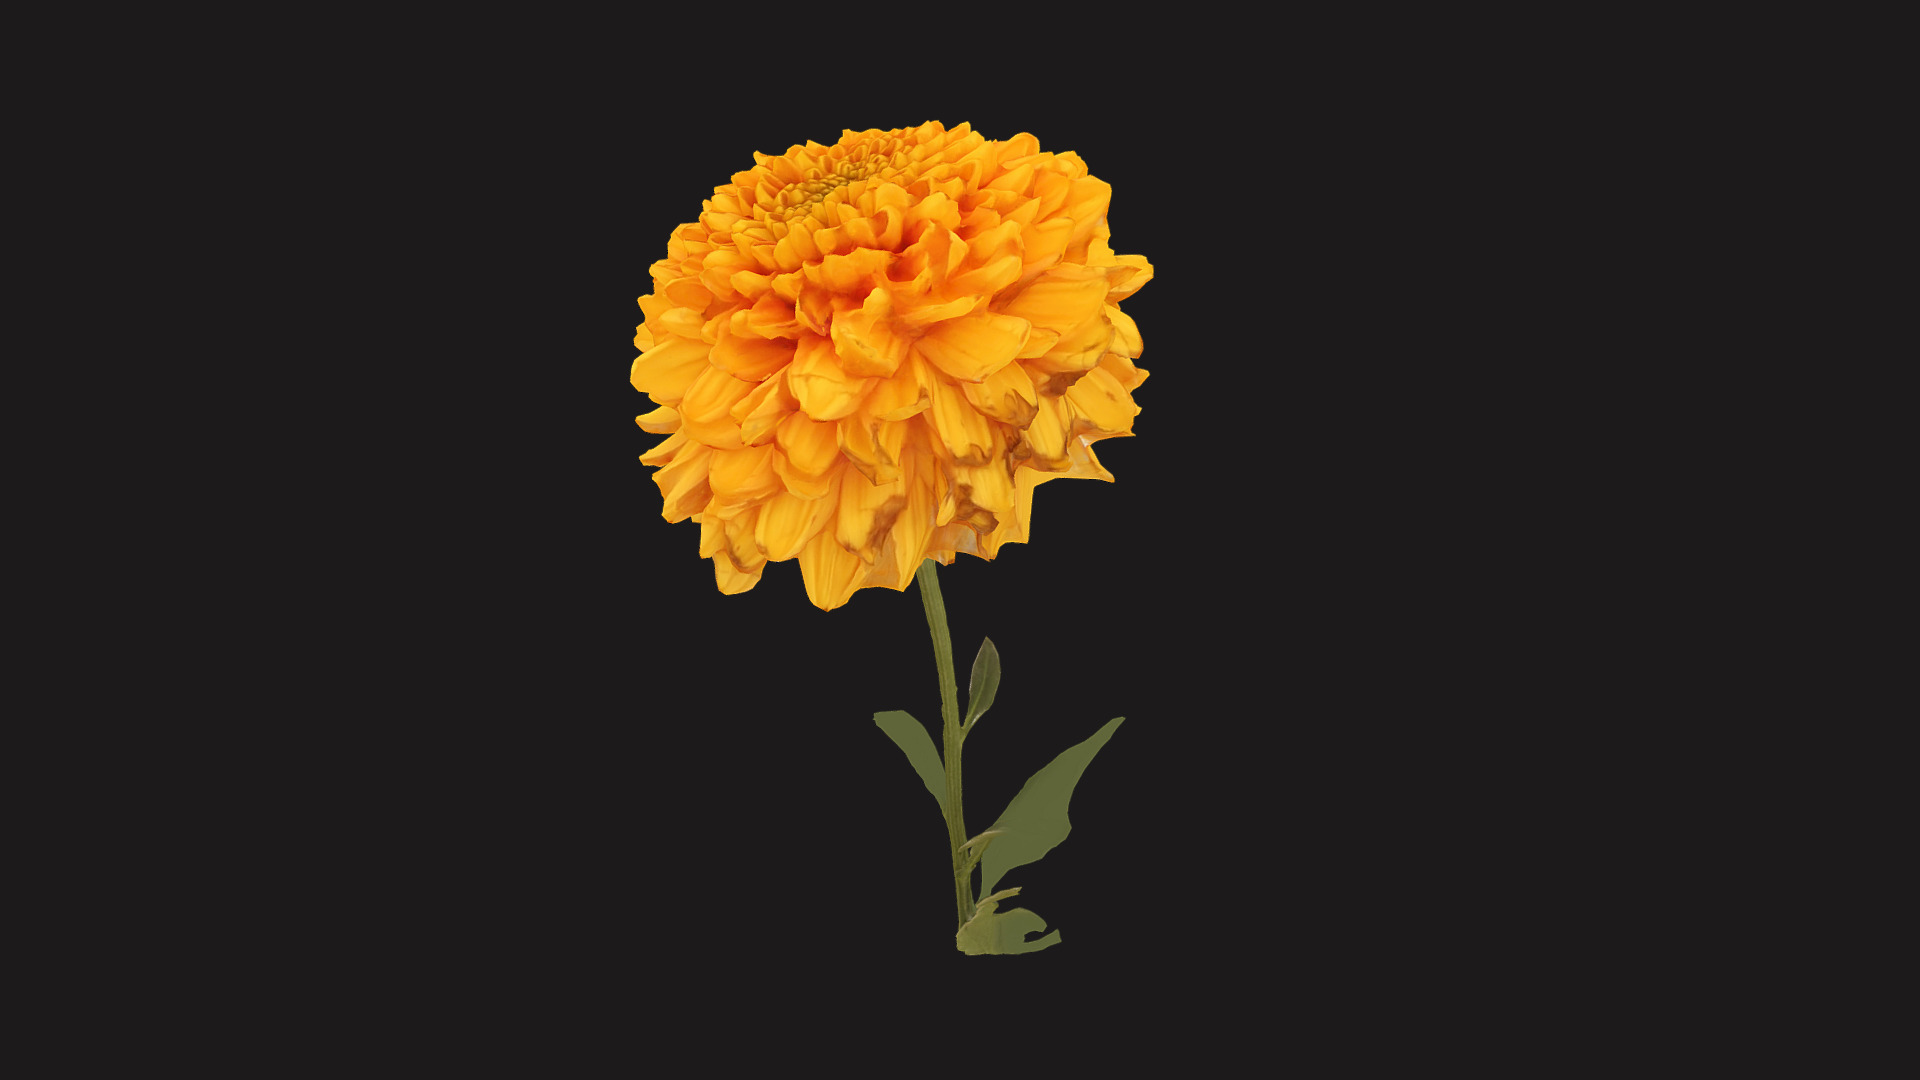 3D model Fw25 – Orange Flower - This is a 3D model of the Fw25 - Orange Flower. The 3D model is about a yellow flower with green leaves.